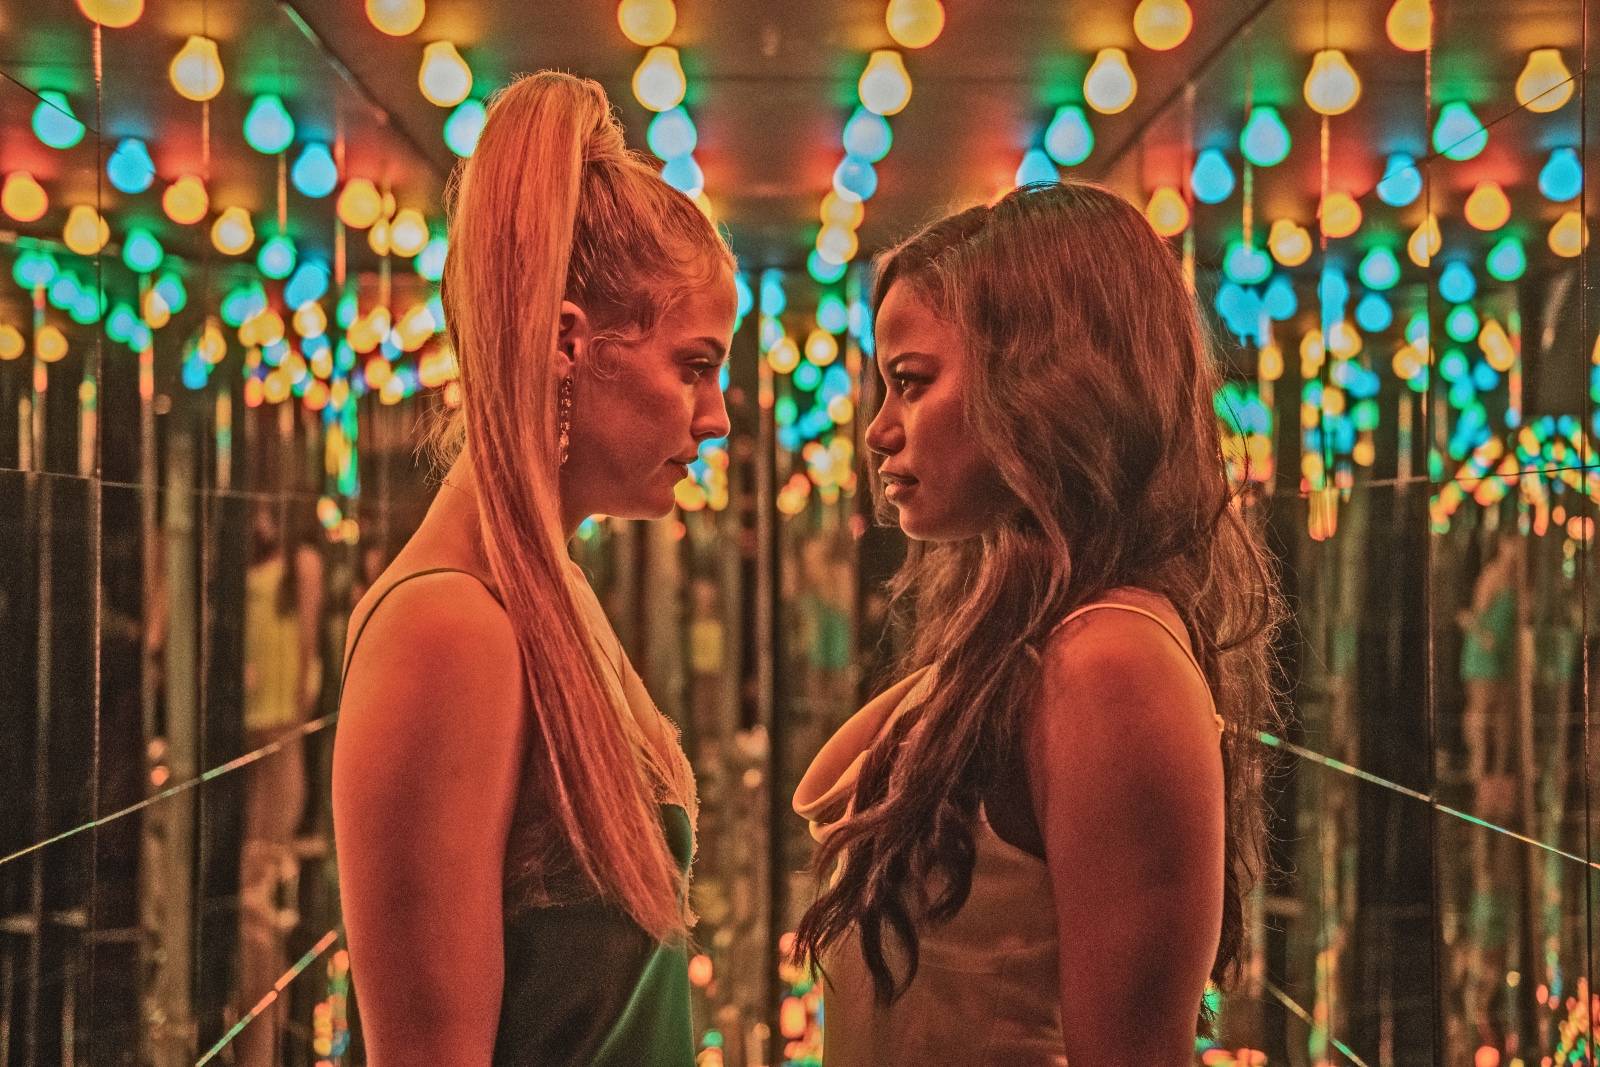 Riley Keough (left) stars as "Stefani" and Taylour Paige (right) stars as "Zola" in director Janicza Bravo's ZOLA, an A24 Films release. Cr. Anna Kooris / A24 Films